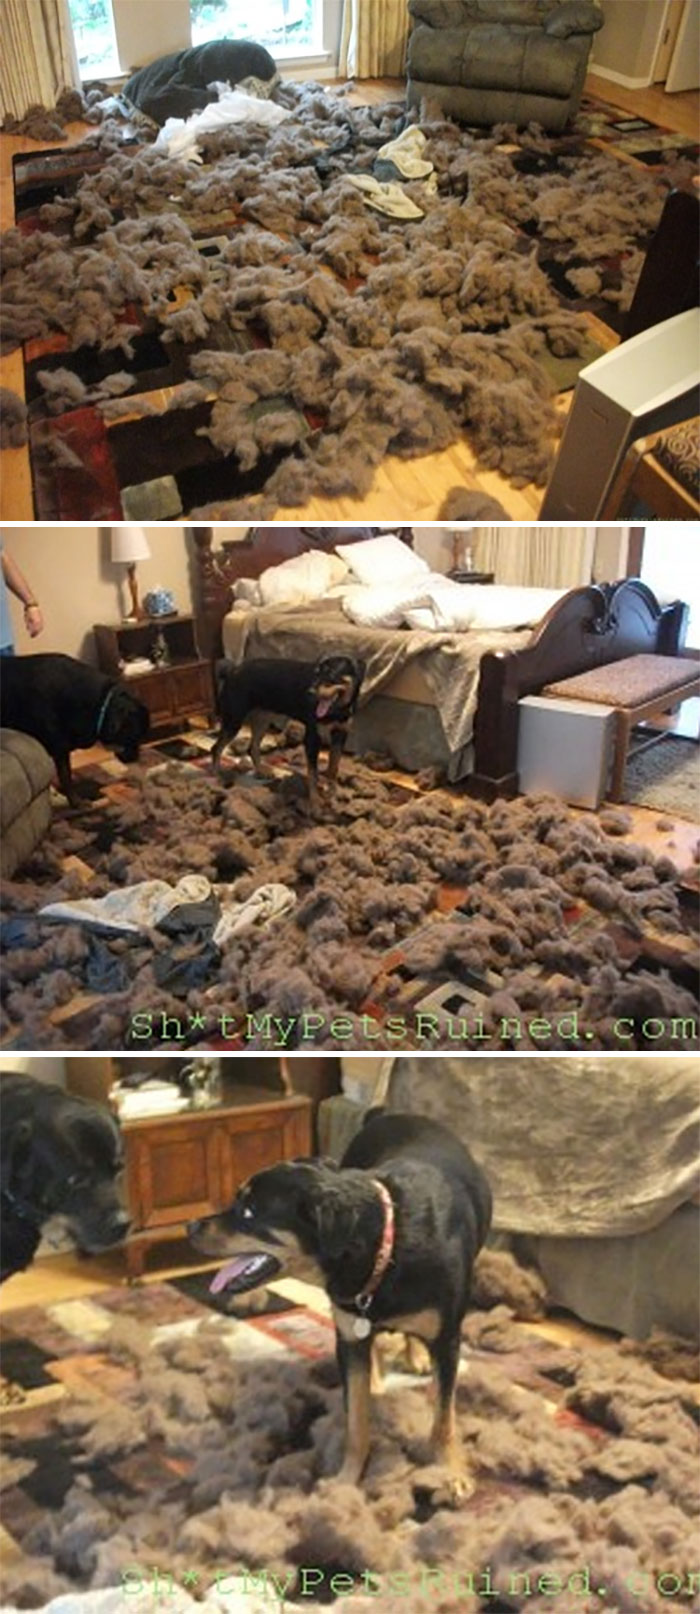 She Murdered Her Bed